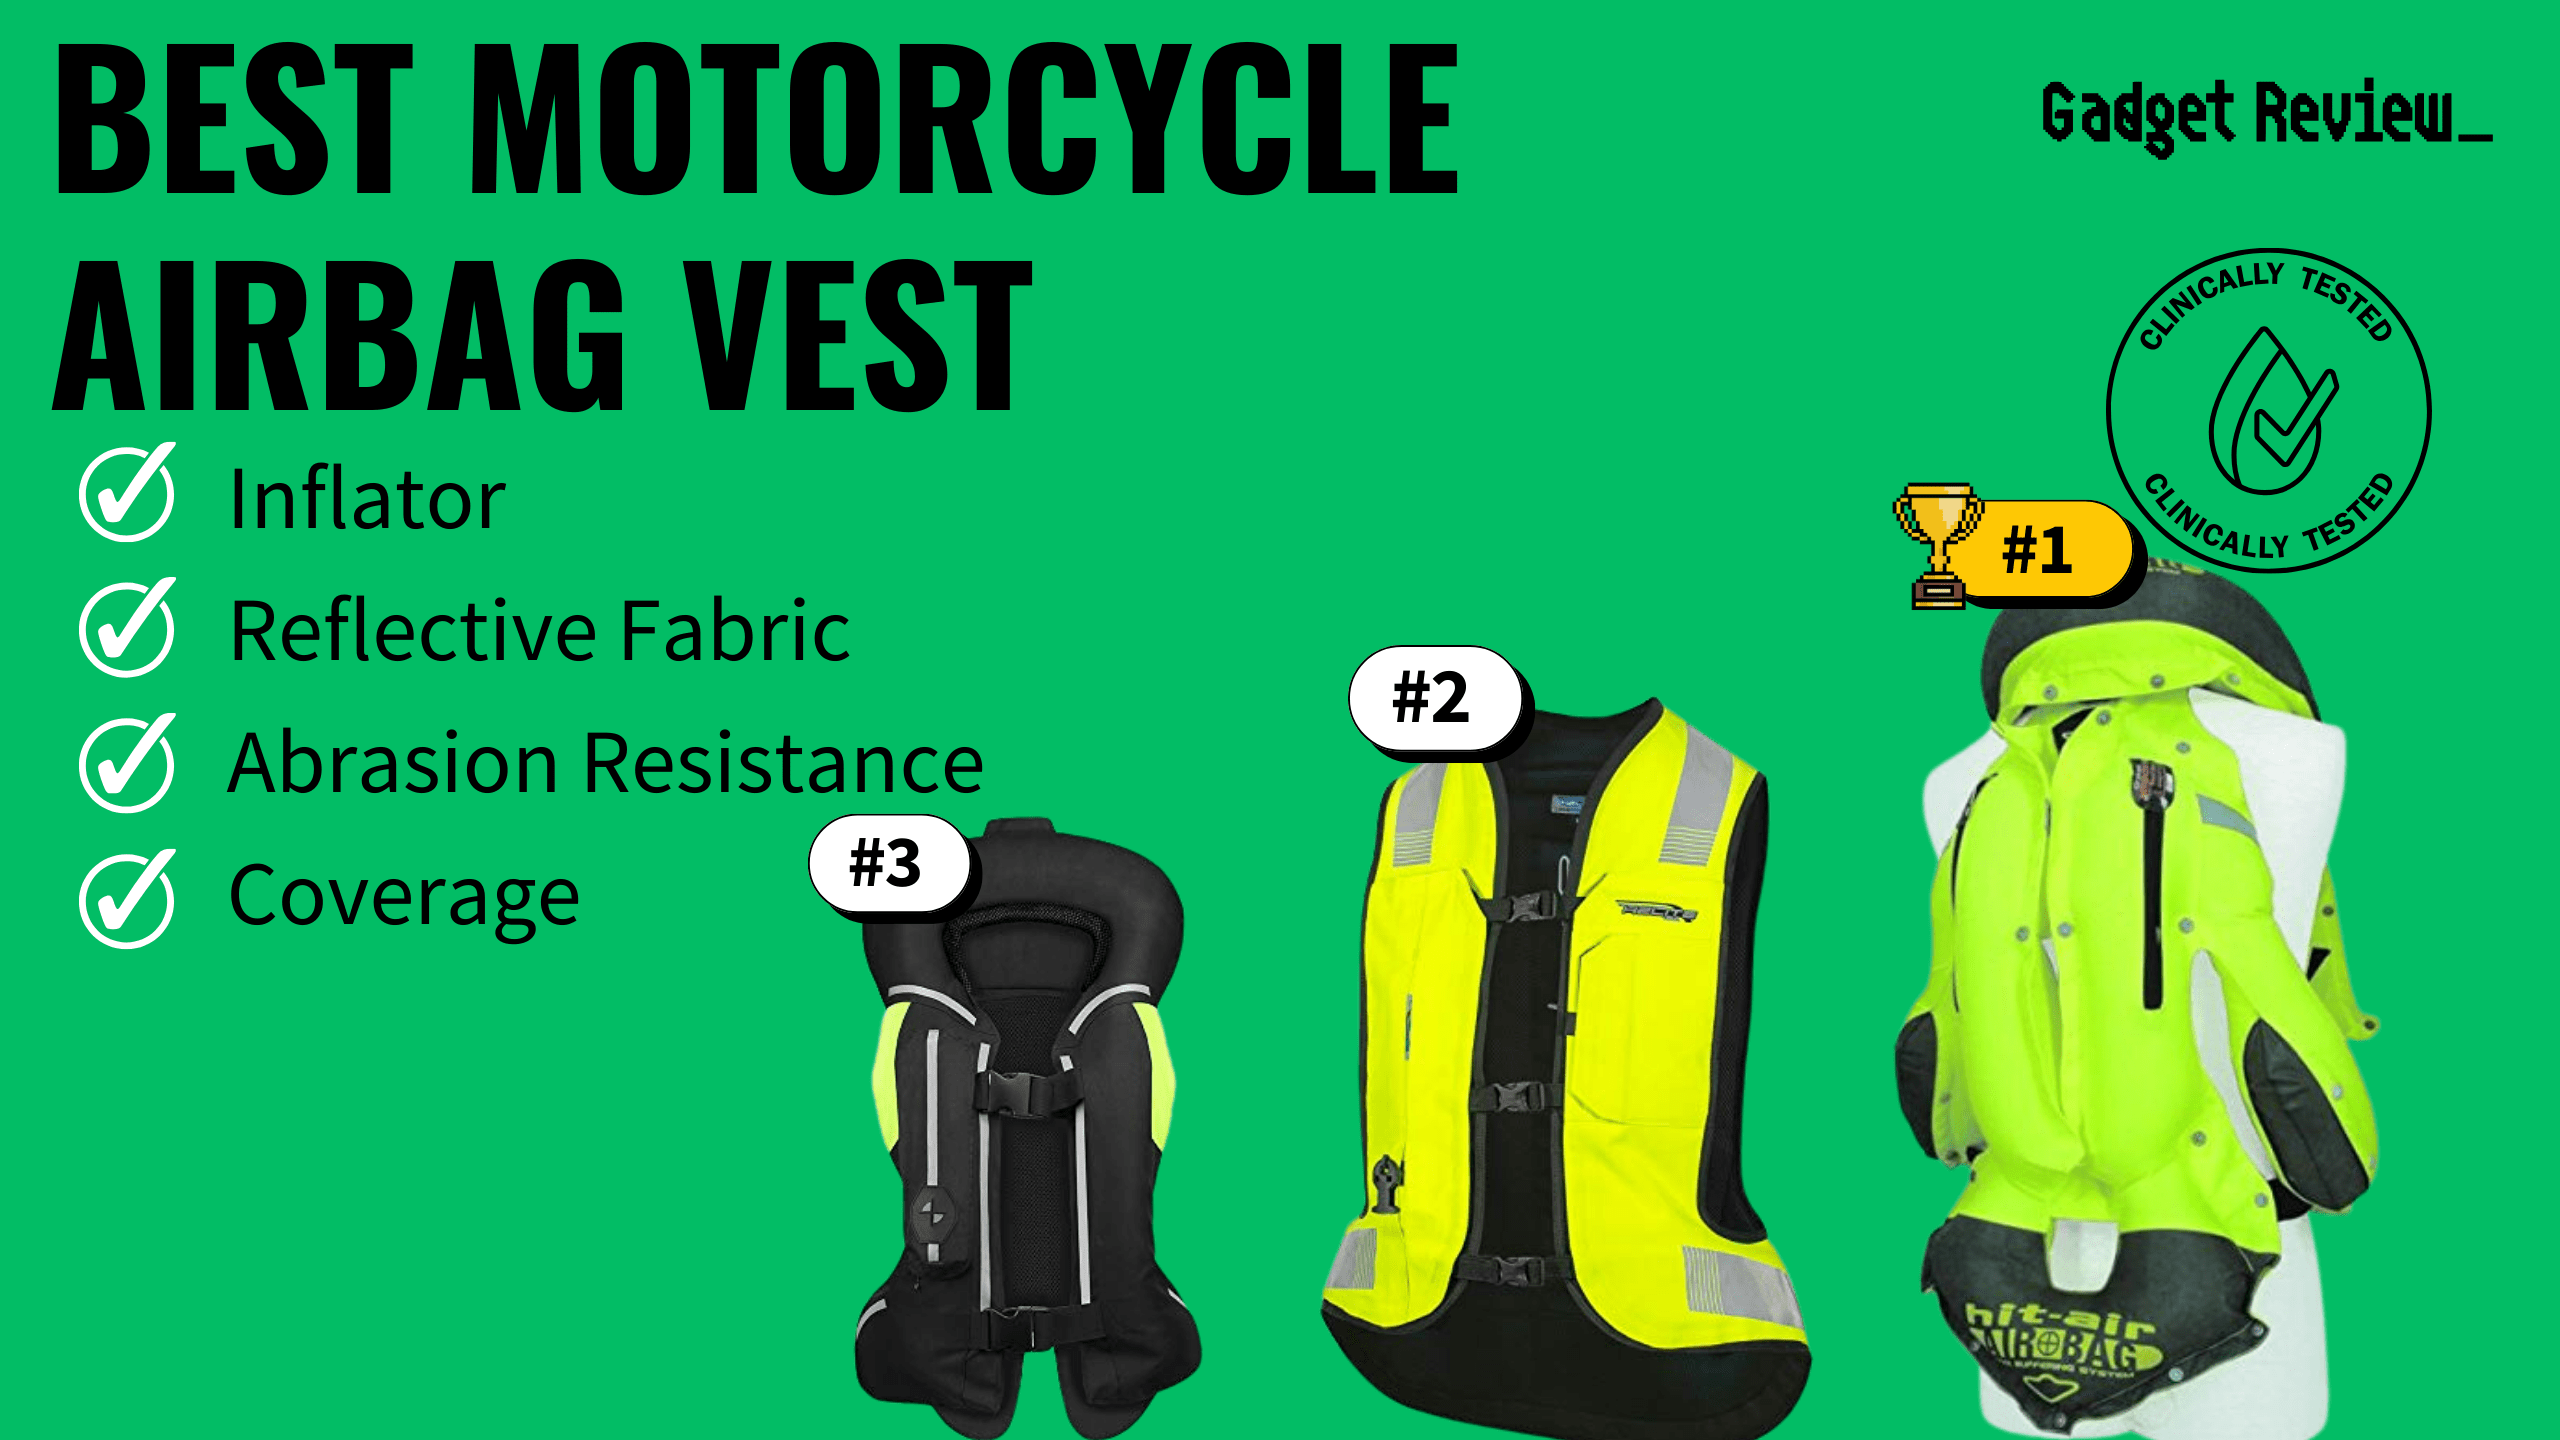 best motorcycle airbag vest featured image that shows the top three best motorcycle models